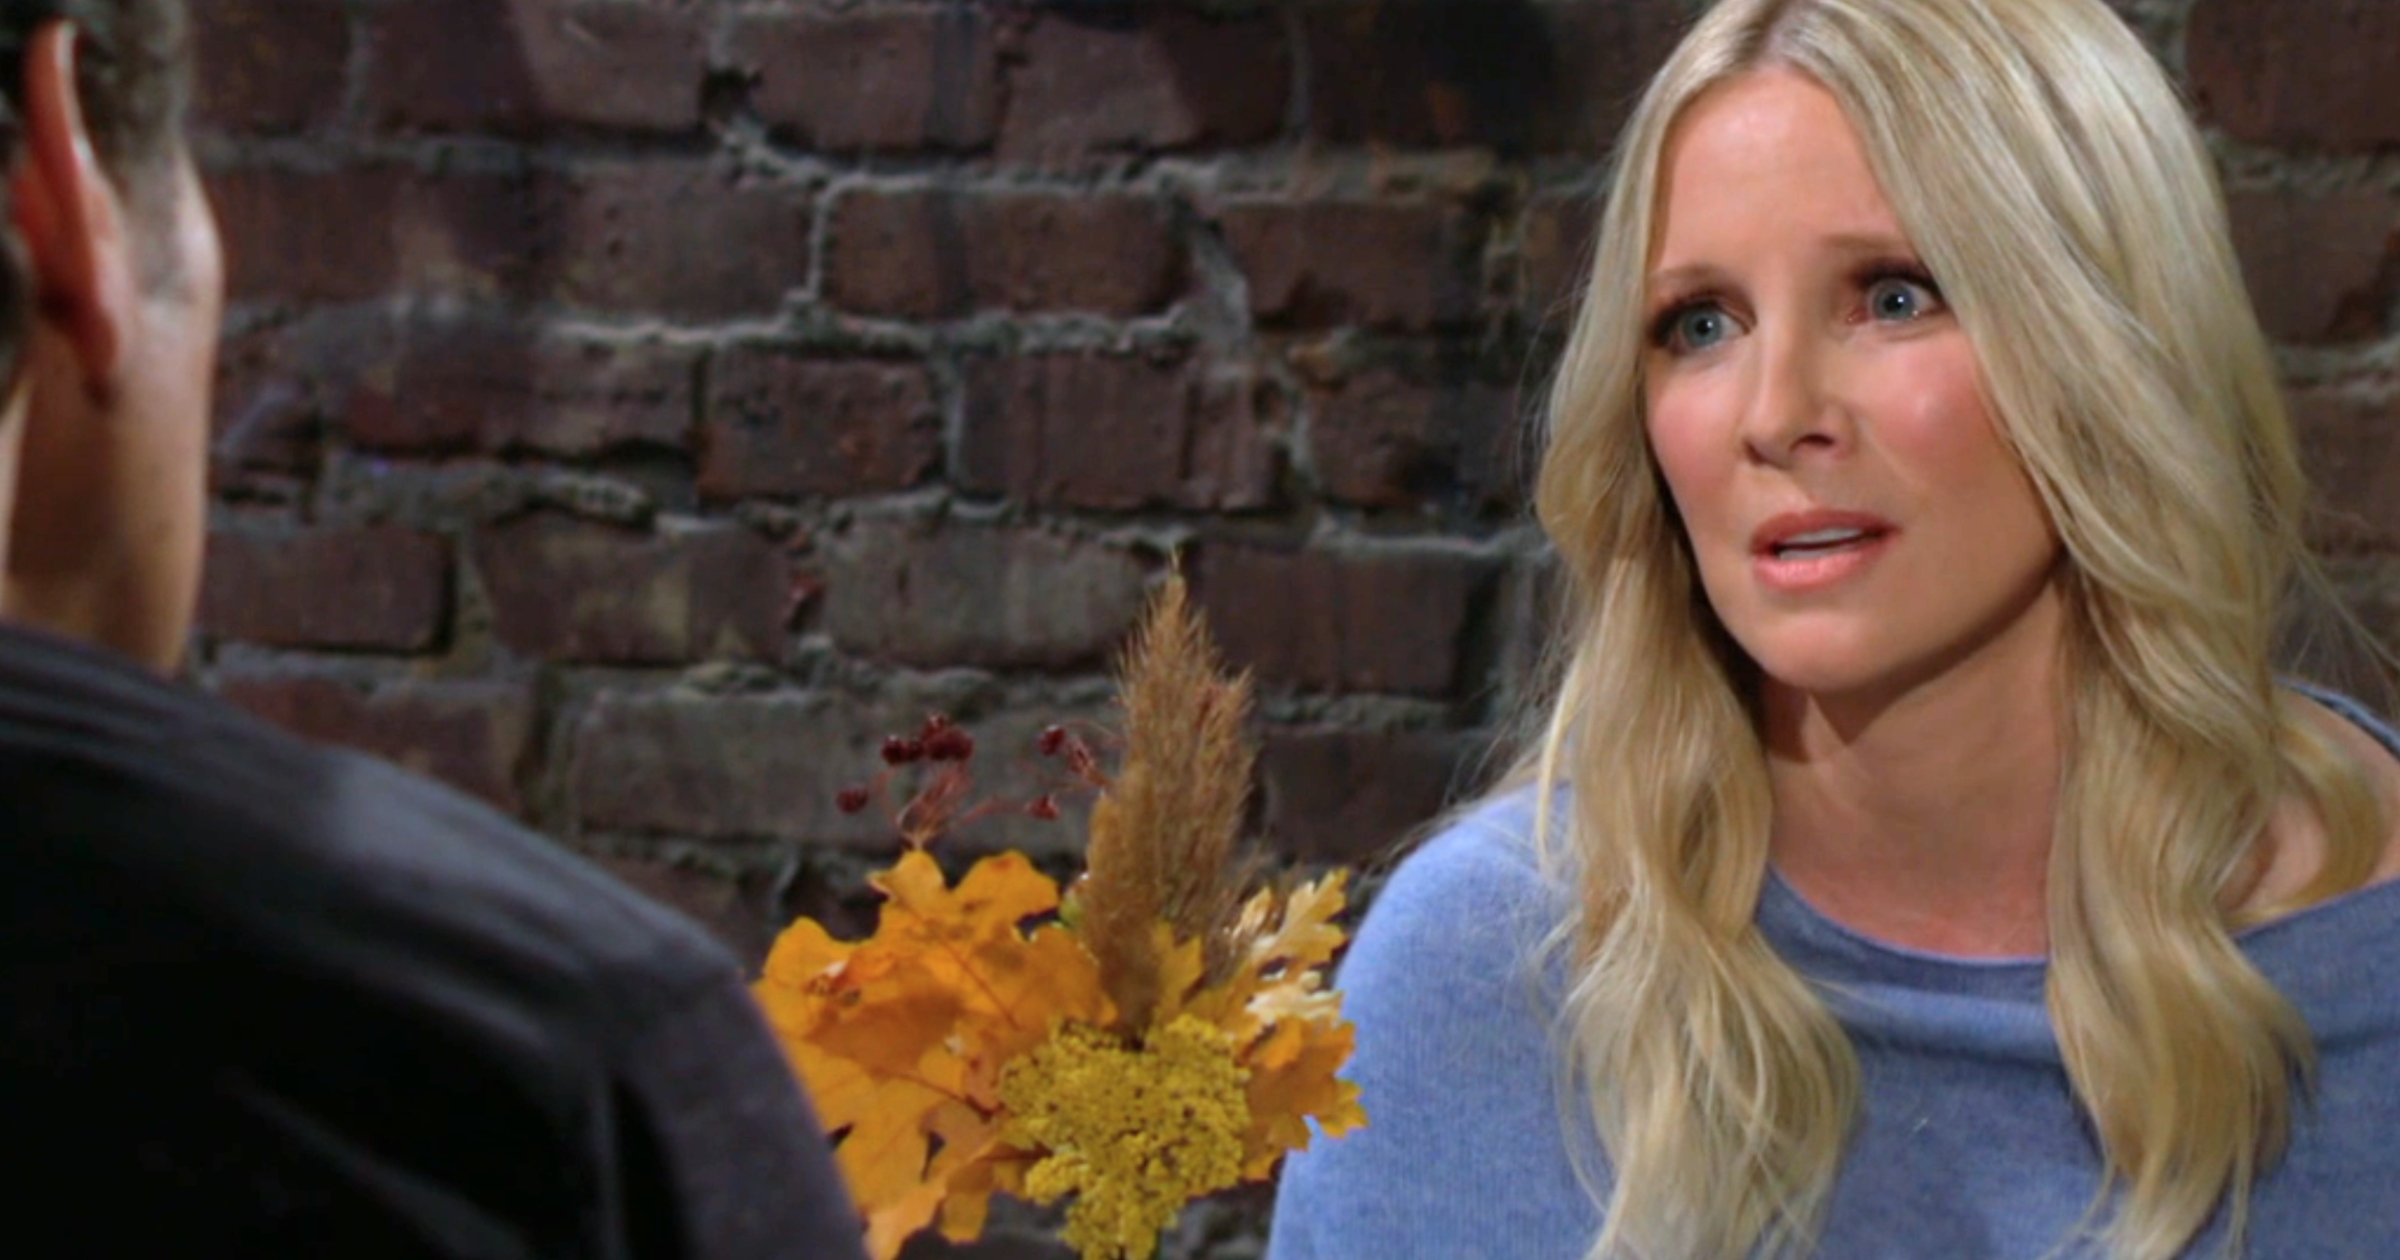 The Young and the Restless - Oct 25 - Christine and Danny